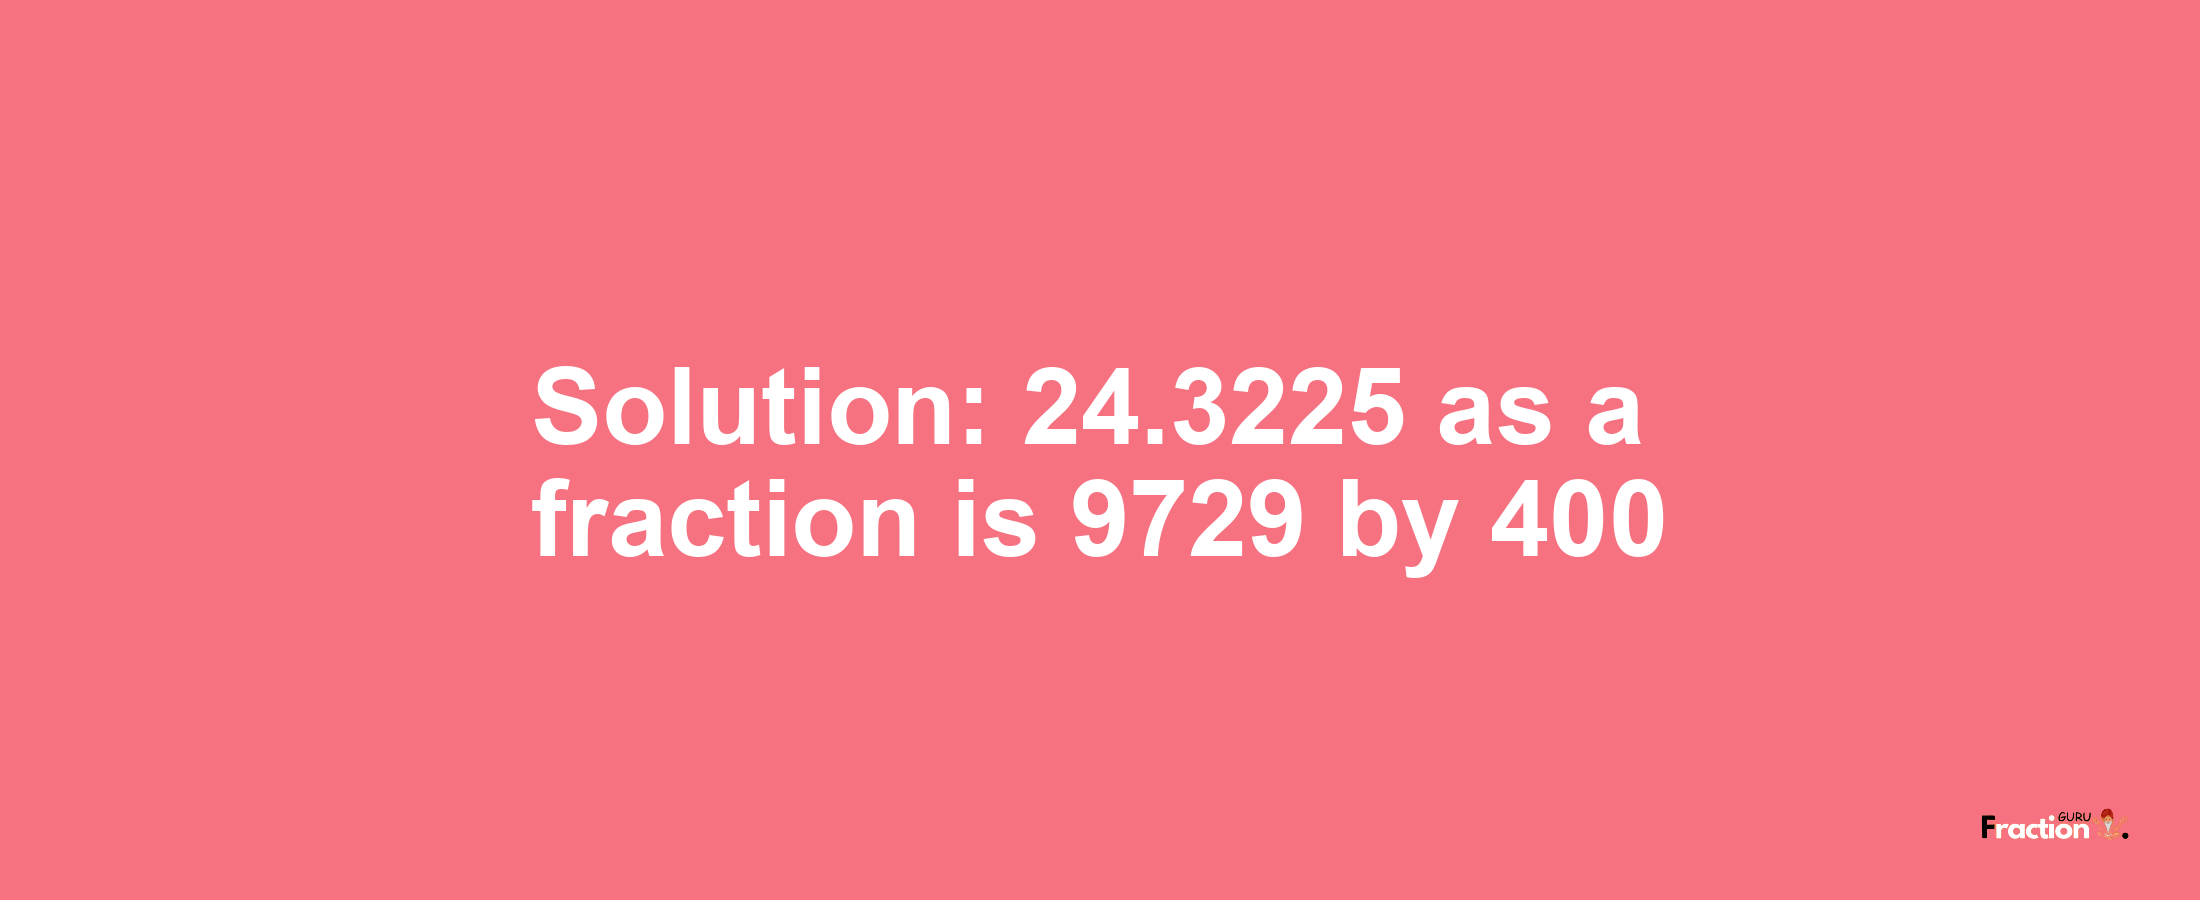 Solution:24.3225 as a fraction is 9729/400